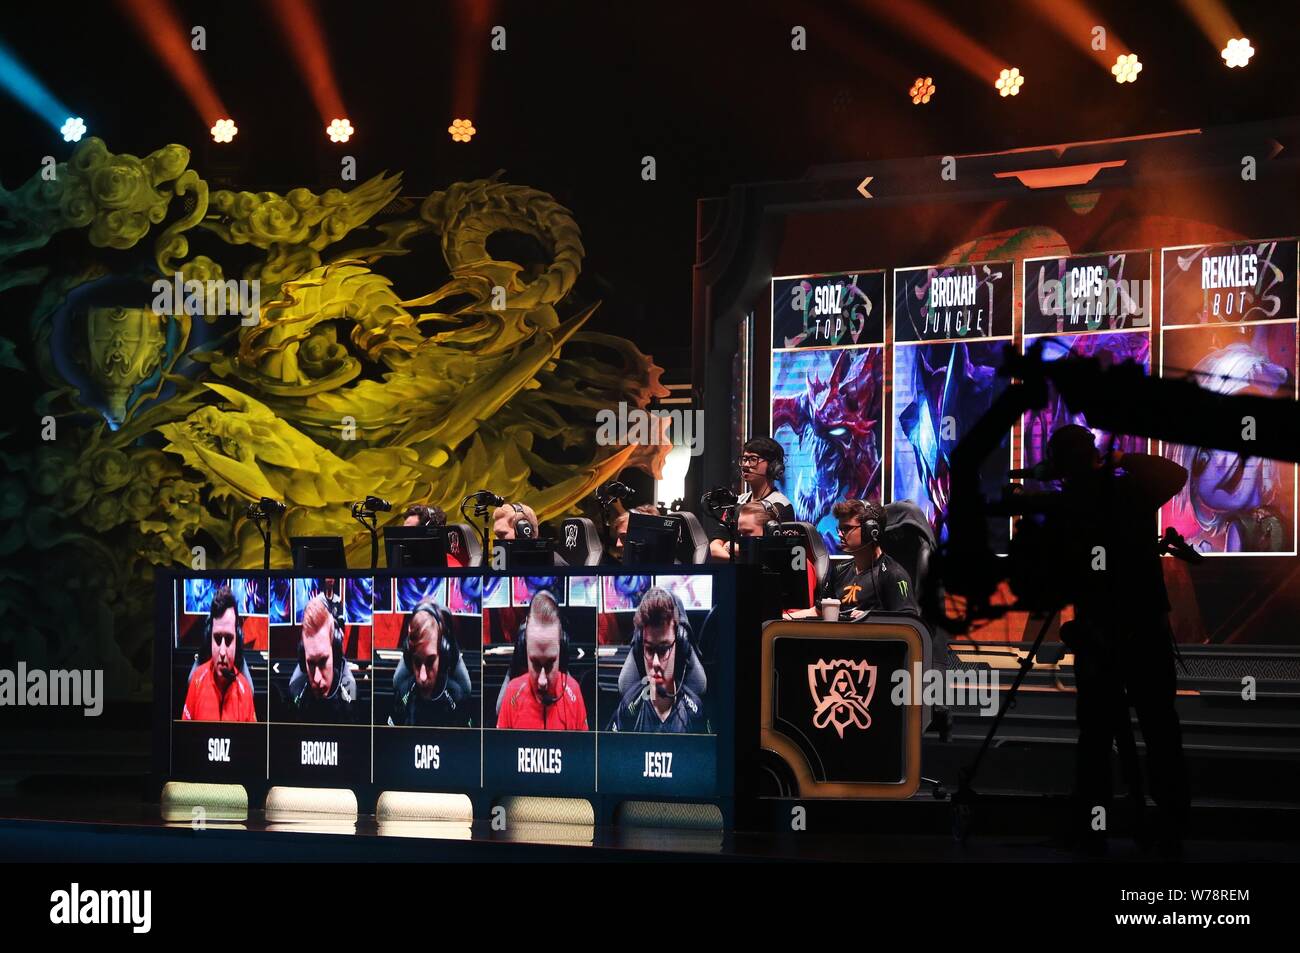 FILE--Players of European team Fnatic compete in the online game, League of Legends (LOL) during the 2017 League of Legends World Championship in Wu Stock Photo